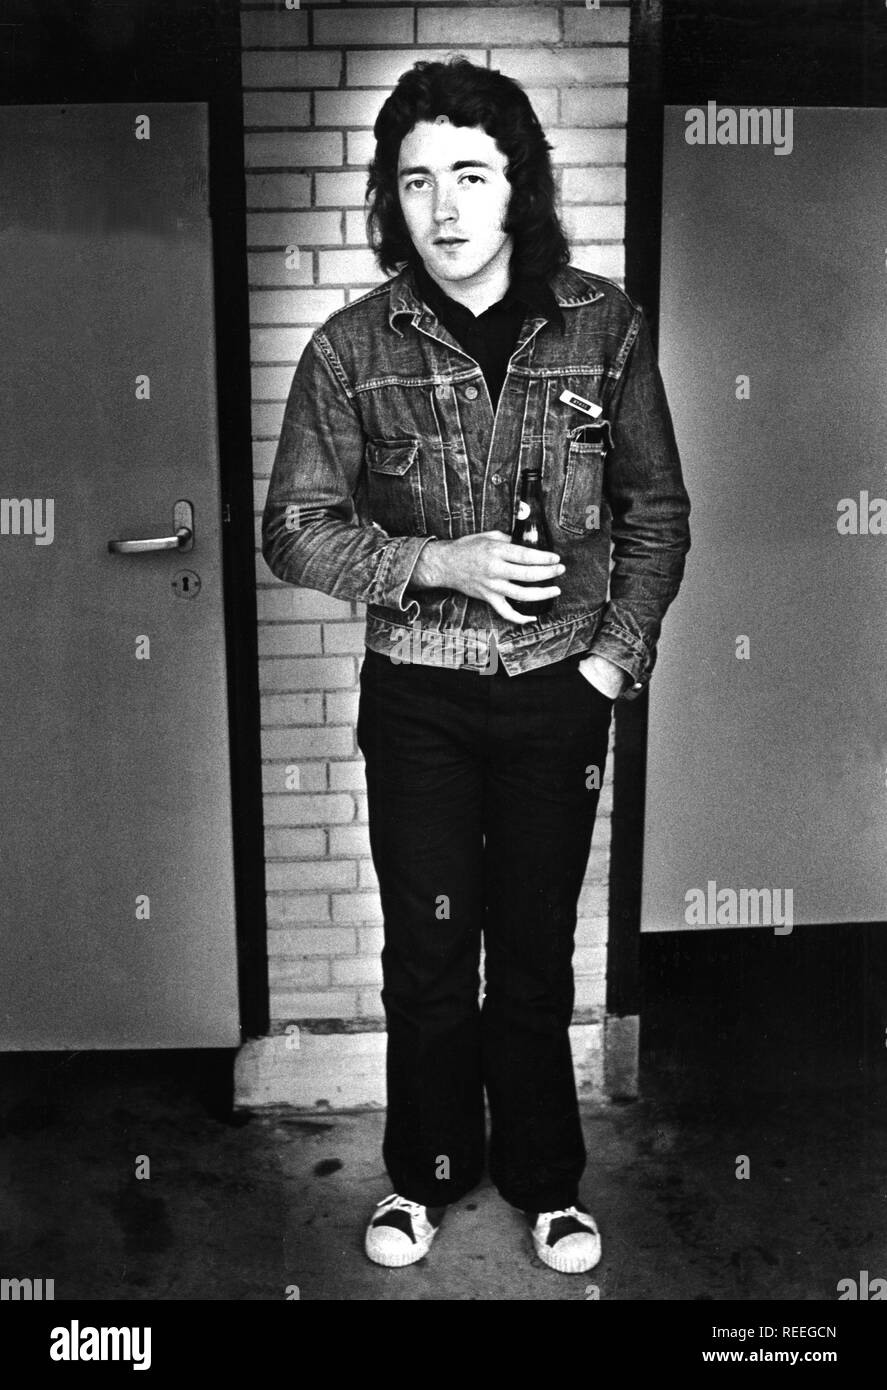 Rory Gallagher, Amsterdam, Netherlands - 1975,  (Photo Gijsbert Hanekroot) *** Local Caption *** Rory Gallagher Stock Photo